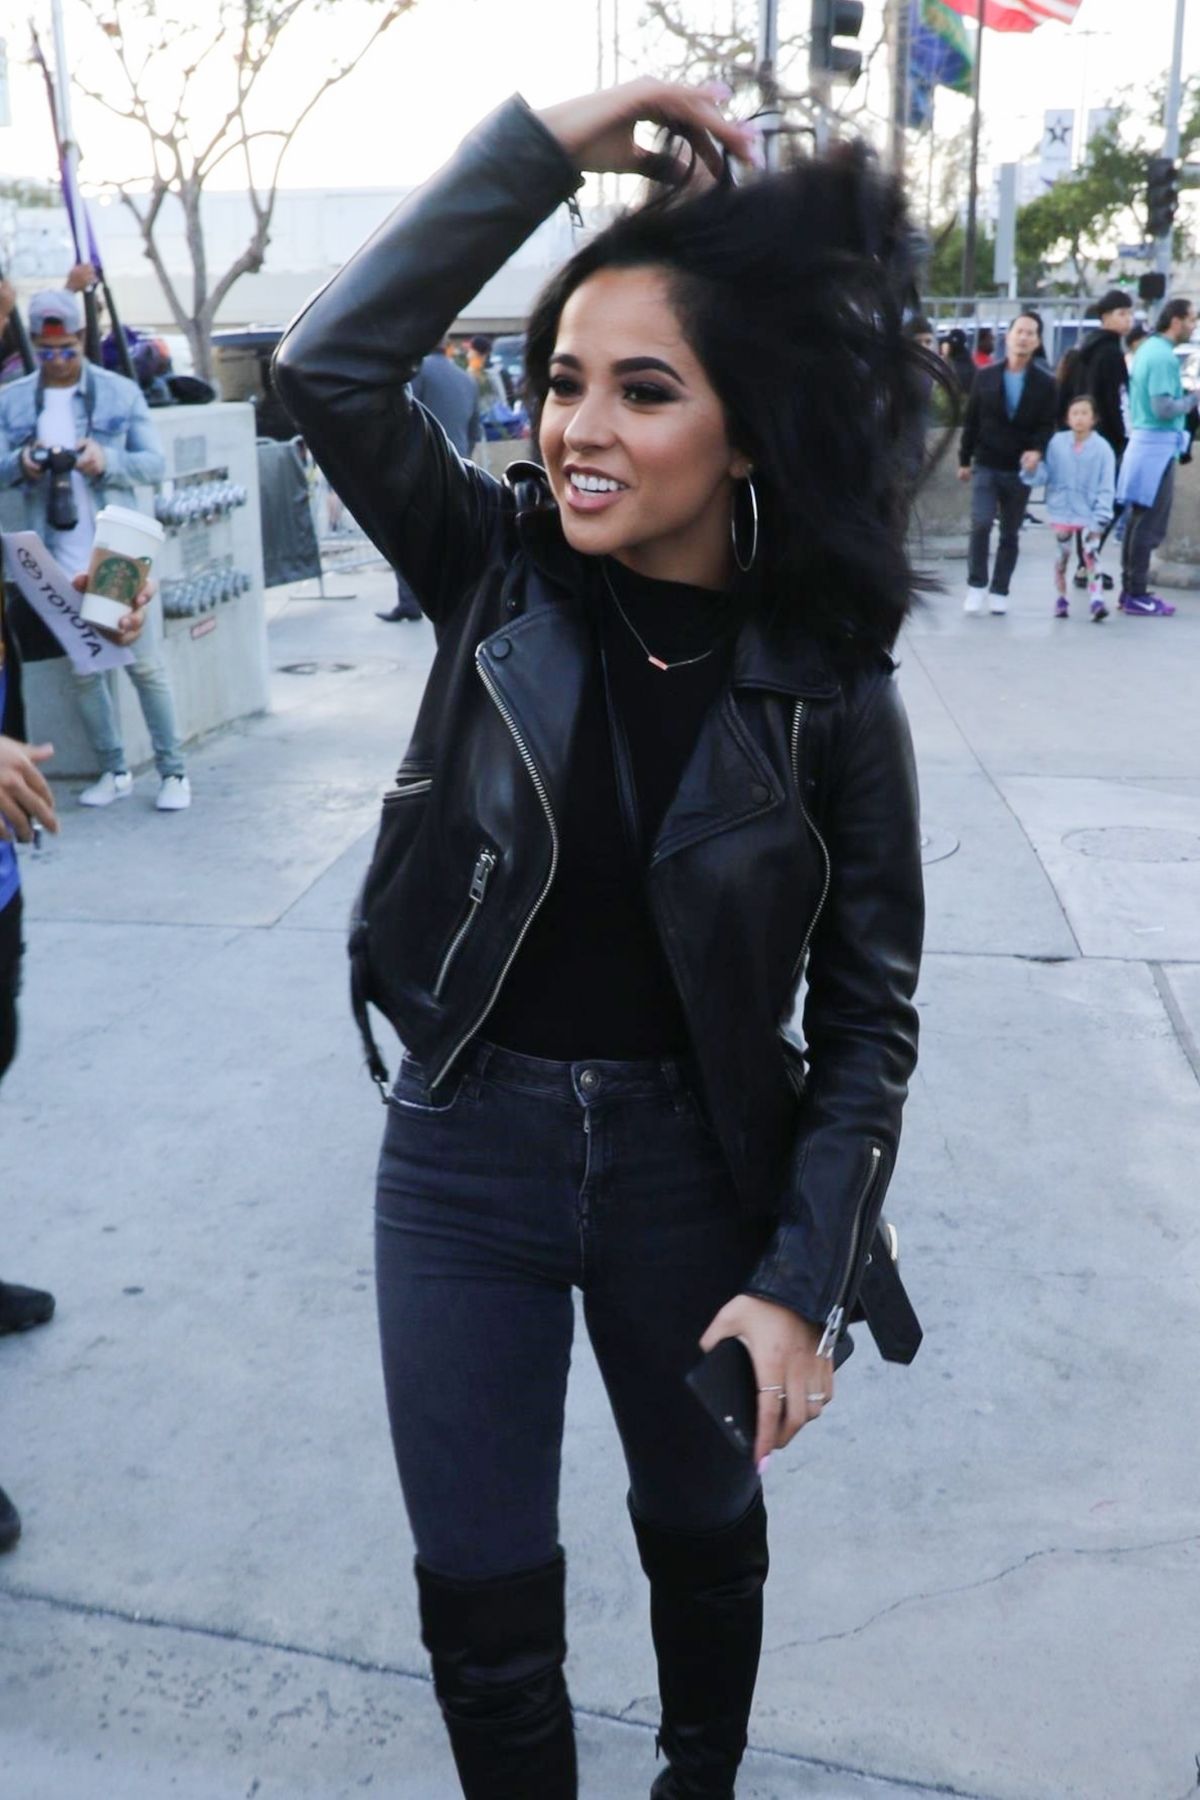 BECKY G Arrives at NBA All-star Game in Los Angeles 02/18/2018 – HawtCelebs